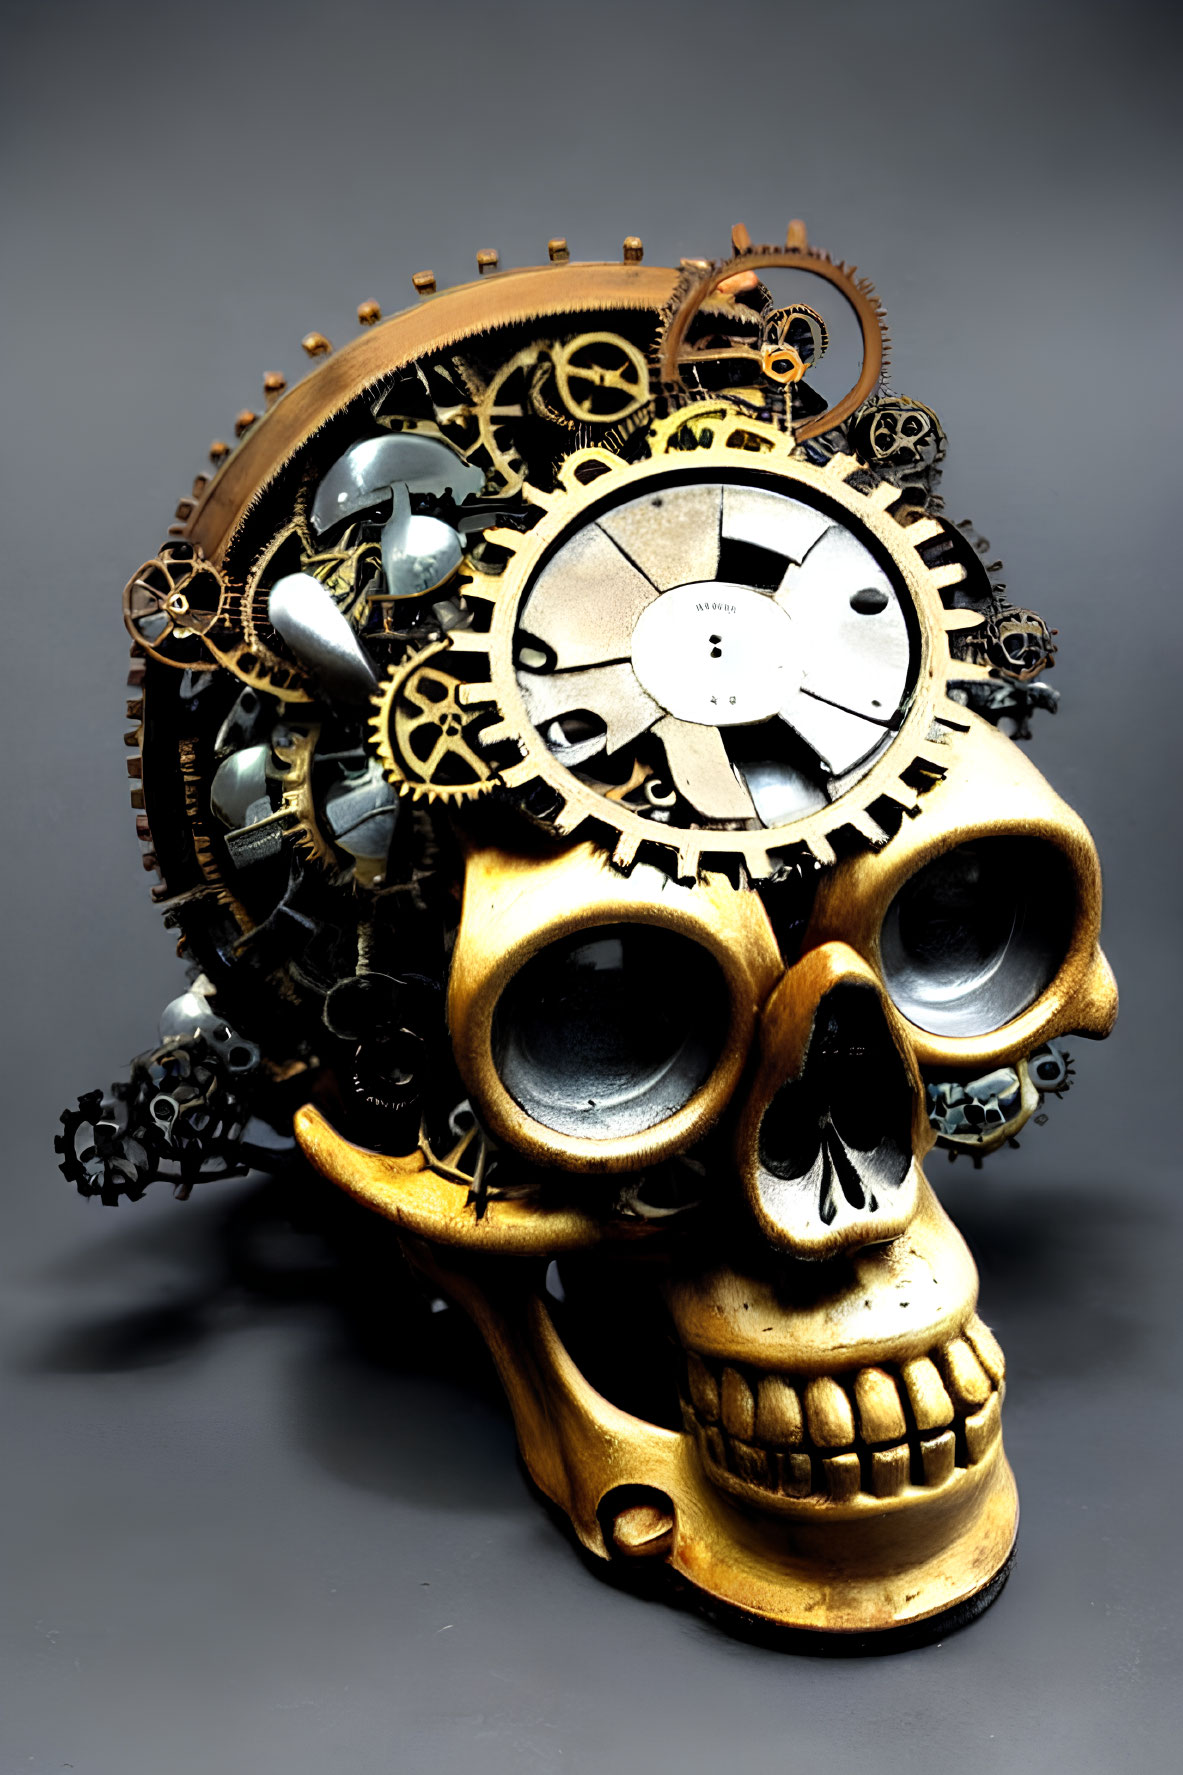 Brass-colored skull with exposed brain area replaced by mechanical gears and cogs